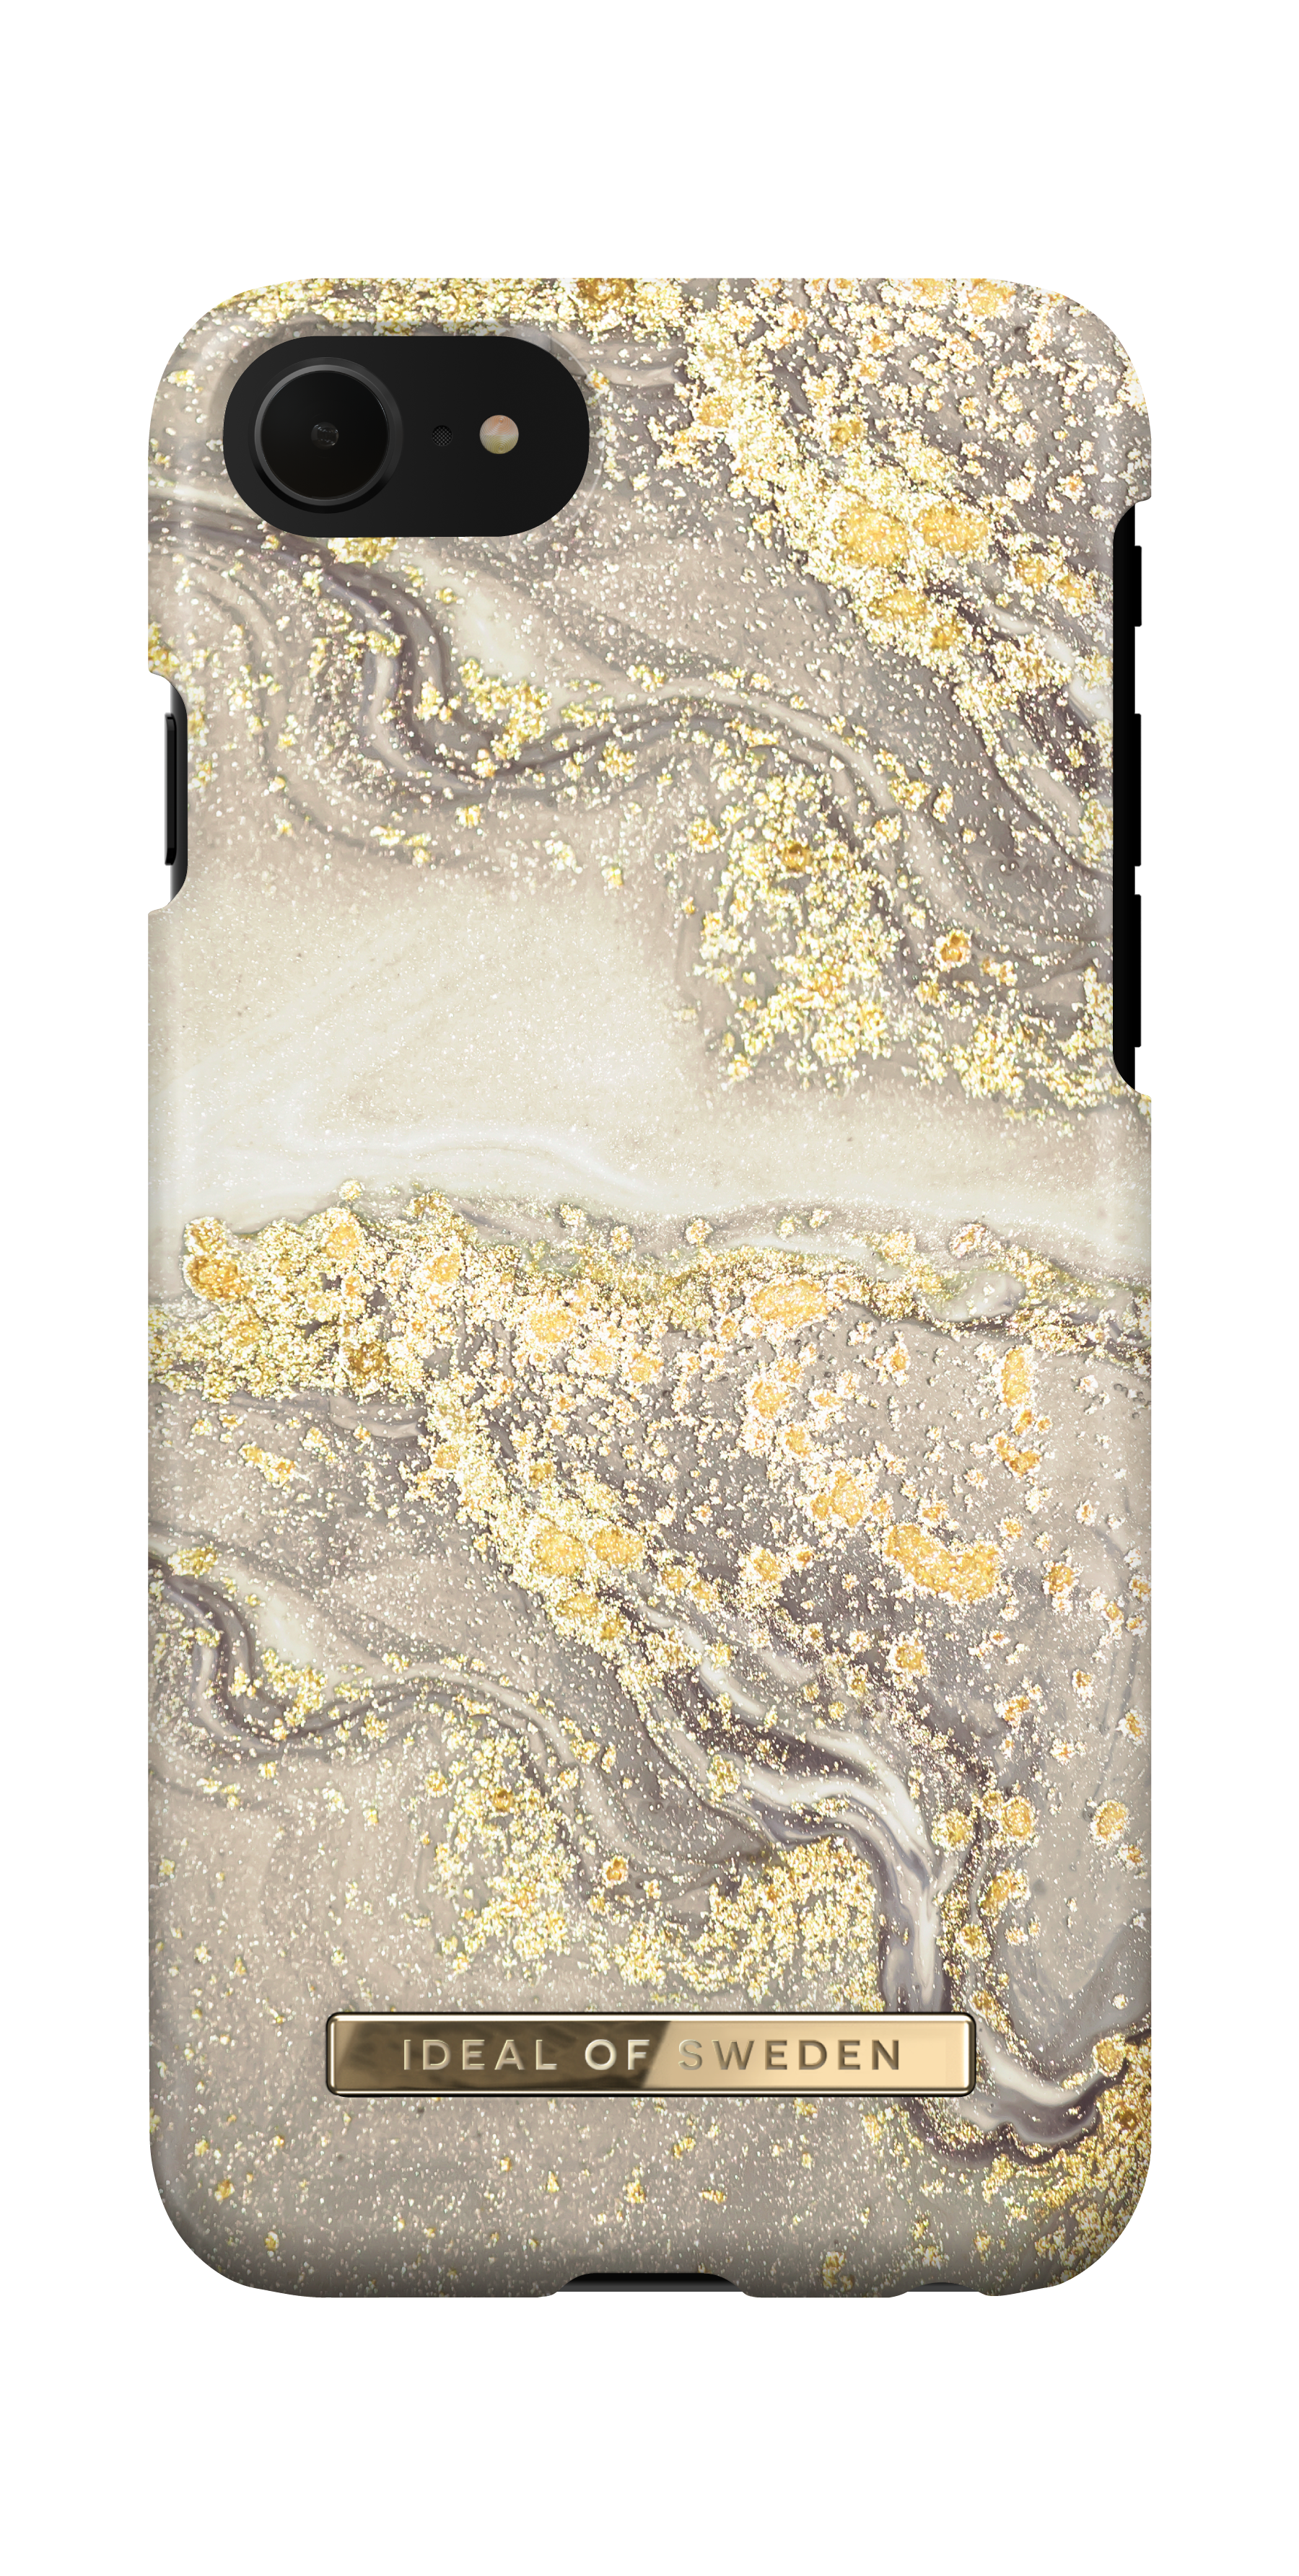 IDEAL OF iPhone Backcover, SWEDEN 8, 7, iPhone (2020), Apple, Sparkle IDFCSS19-I7-121, SE 6(S), Marble Greige iPhone iPhone